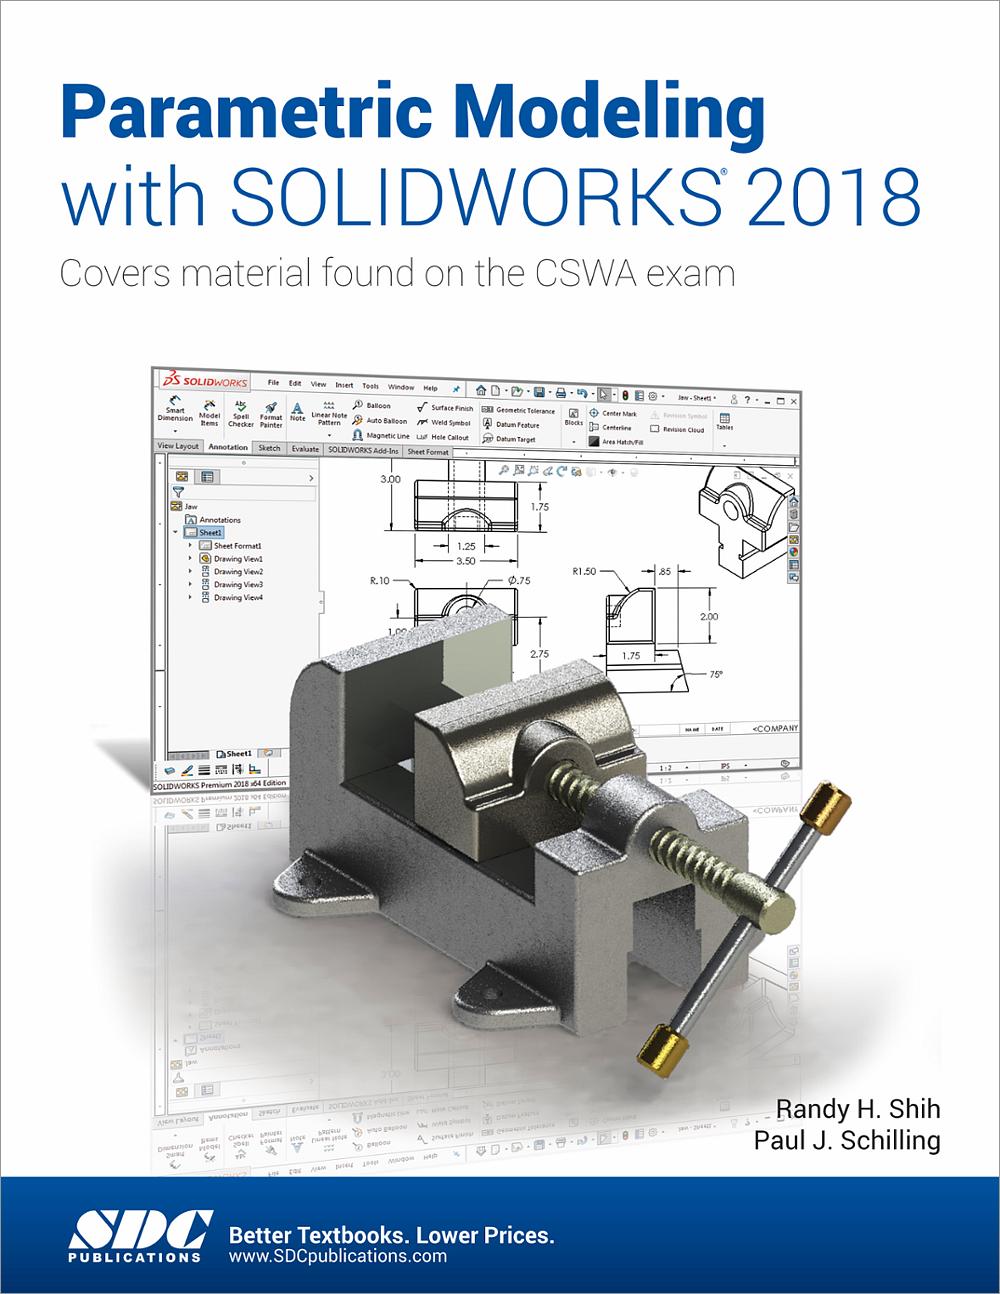 Parametric Modeling with SOLIDWORKS 2018, Book 9781630571412 SDC